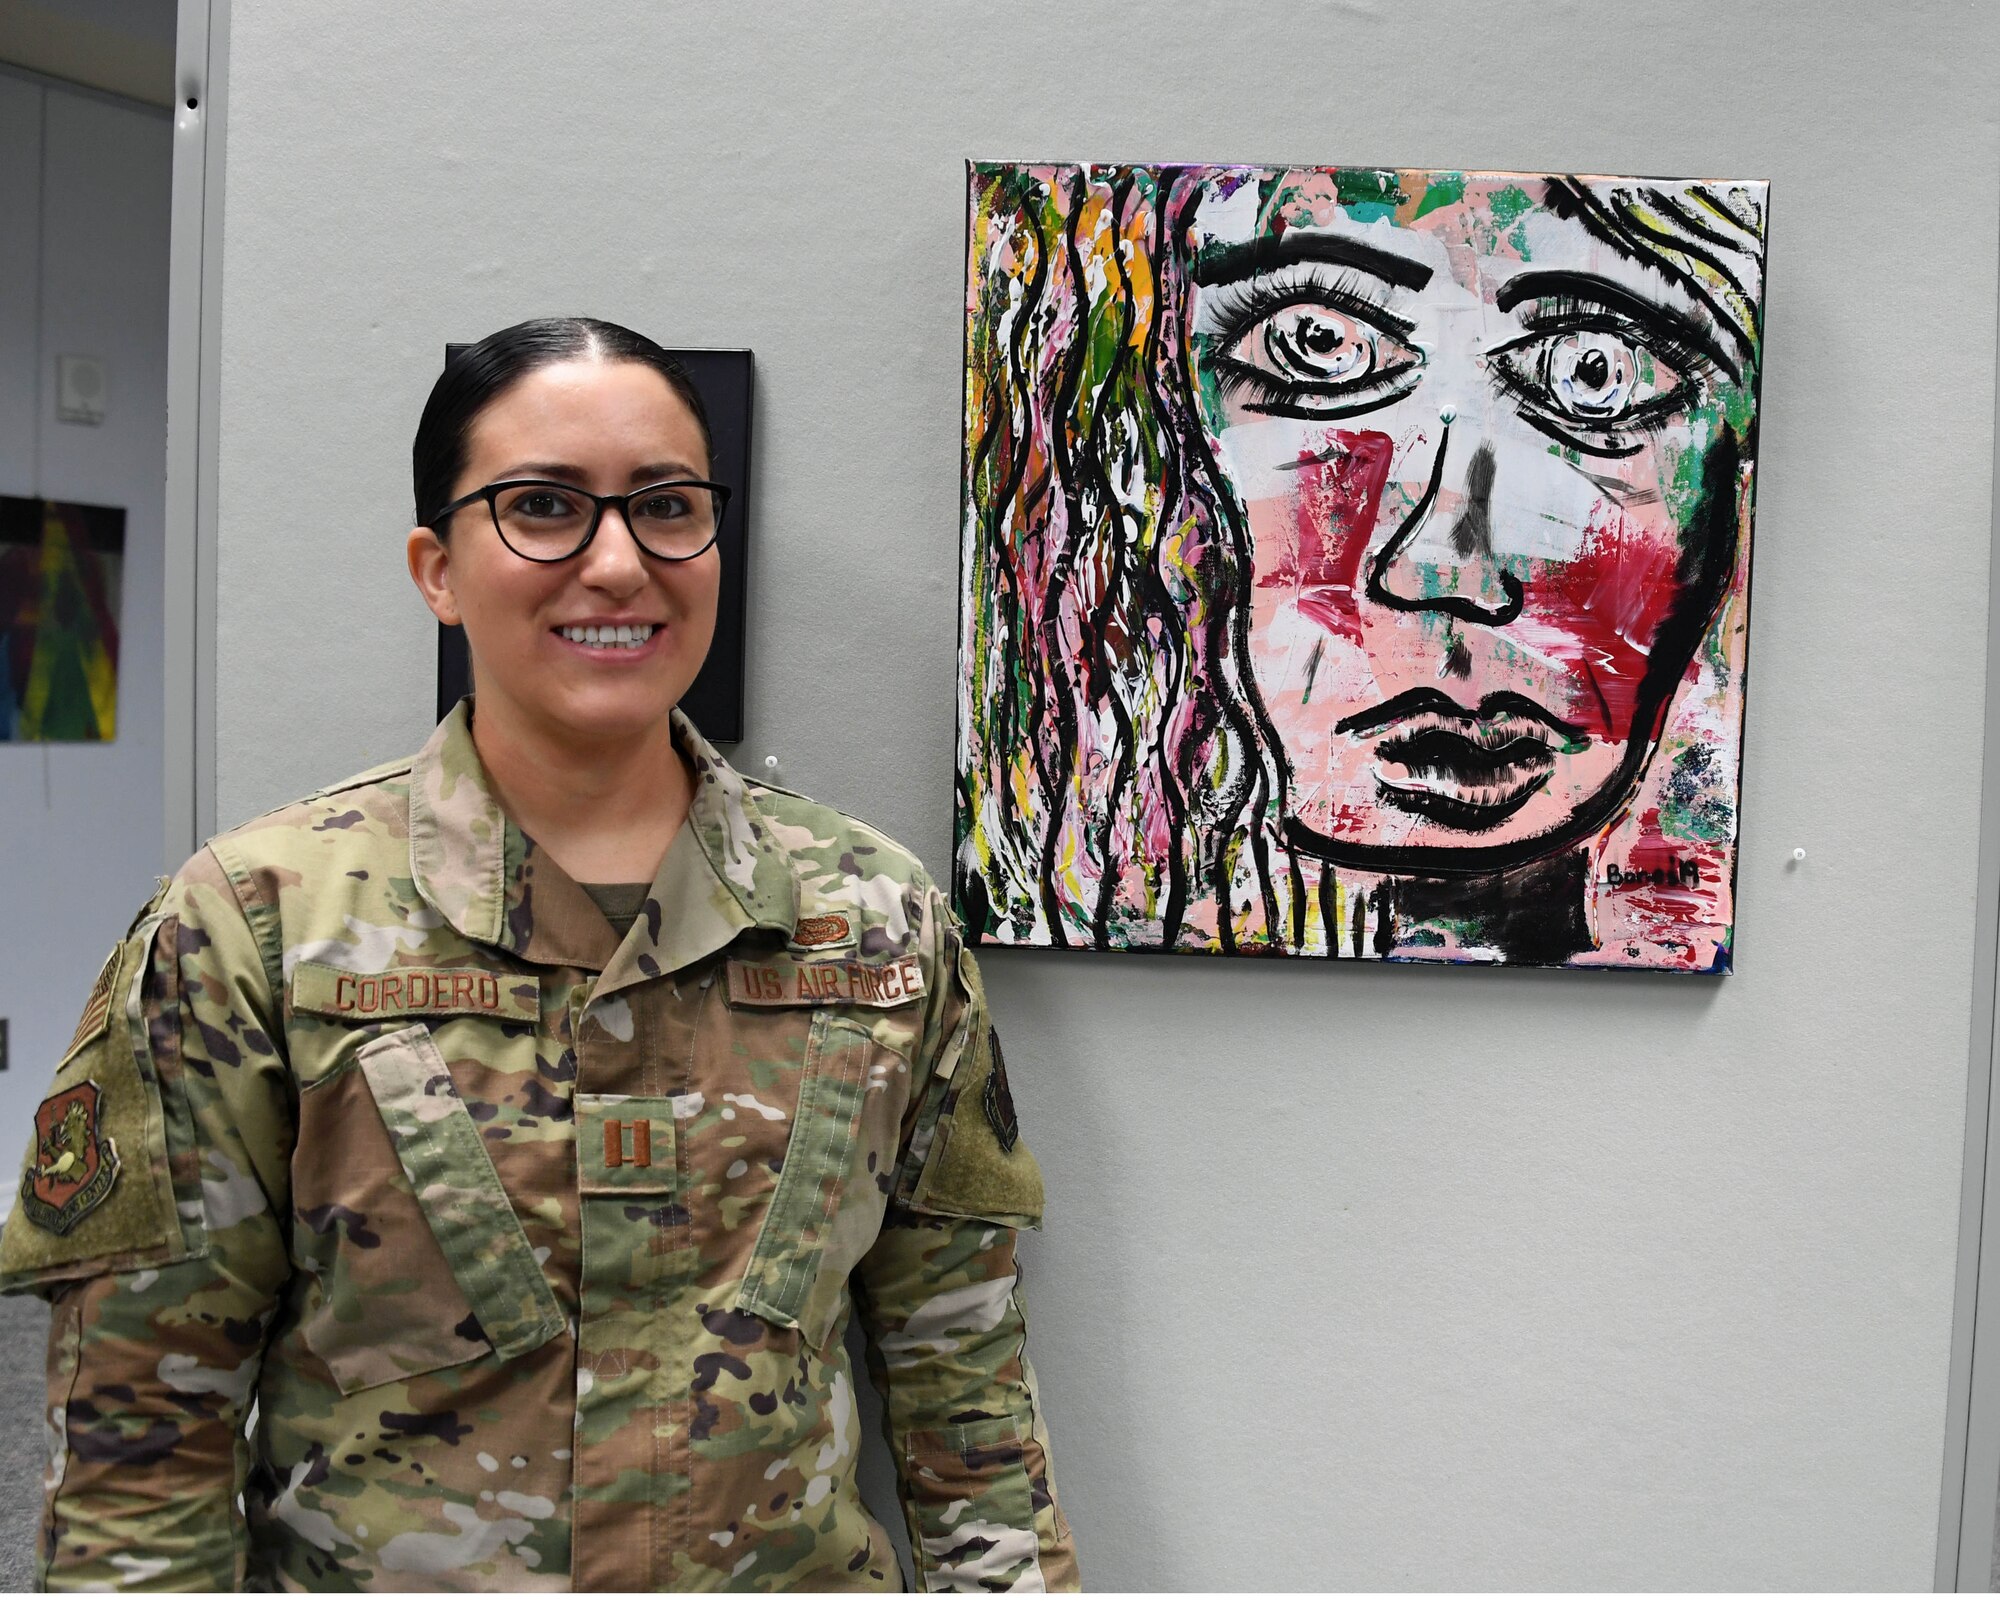 Capt. Lindsay Cordero and her painting on exhibit.